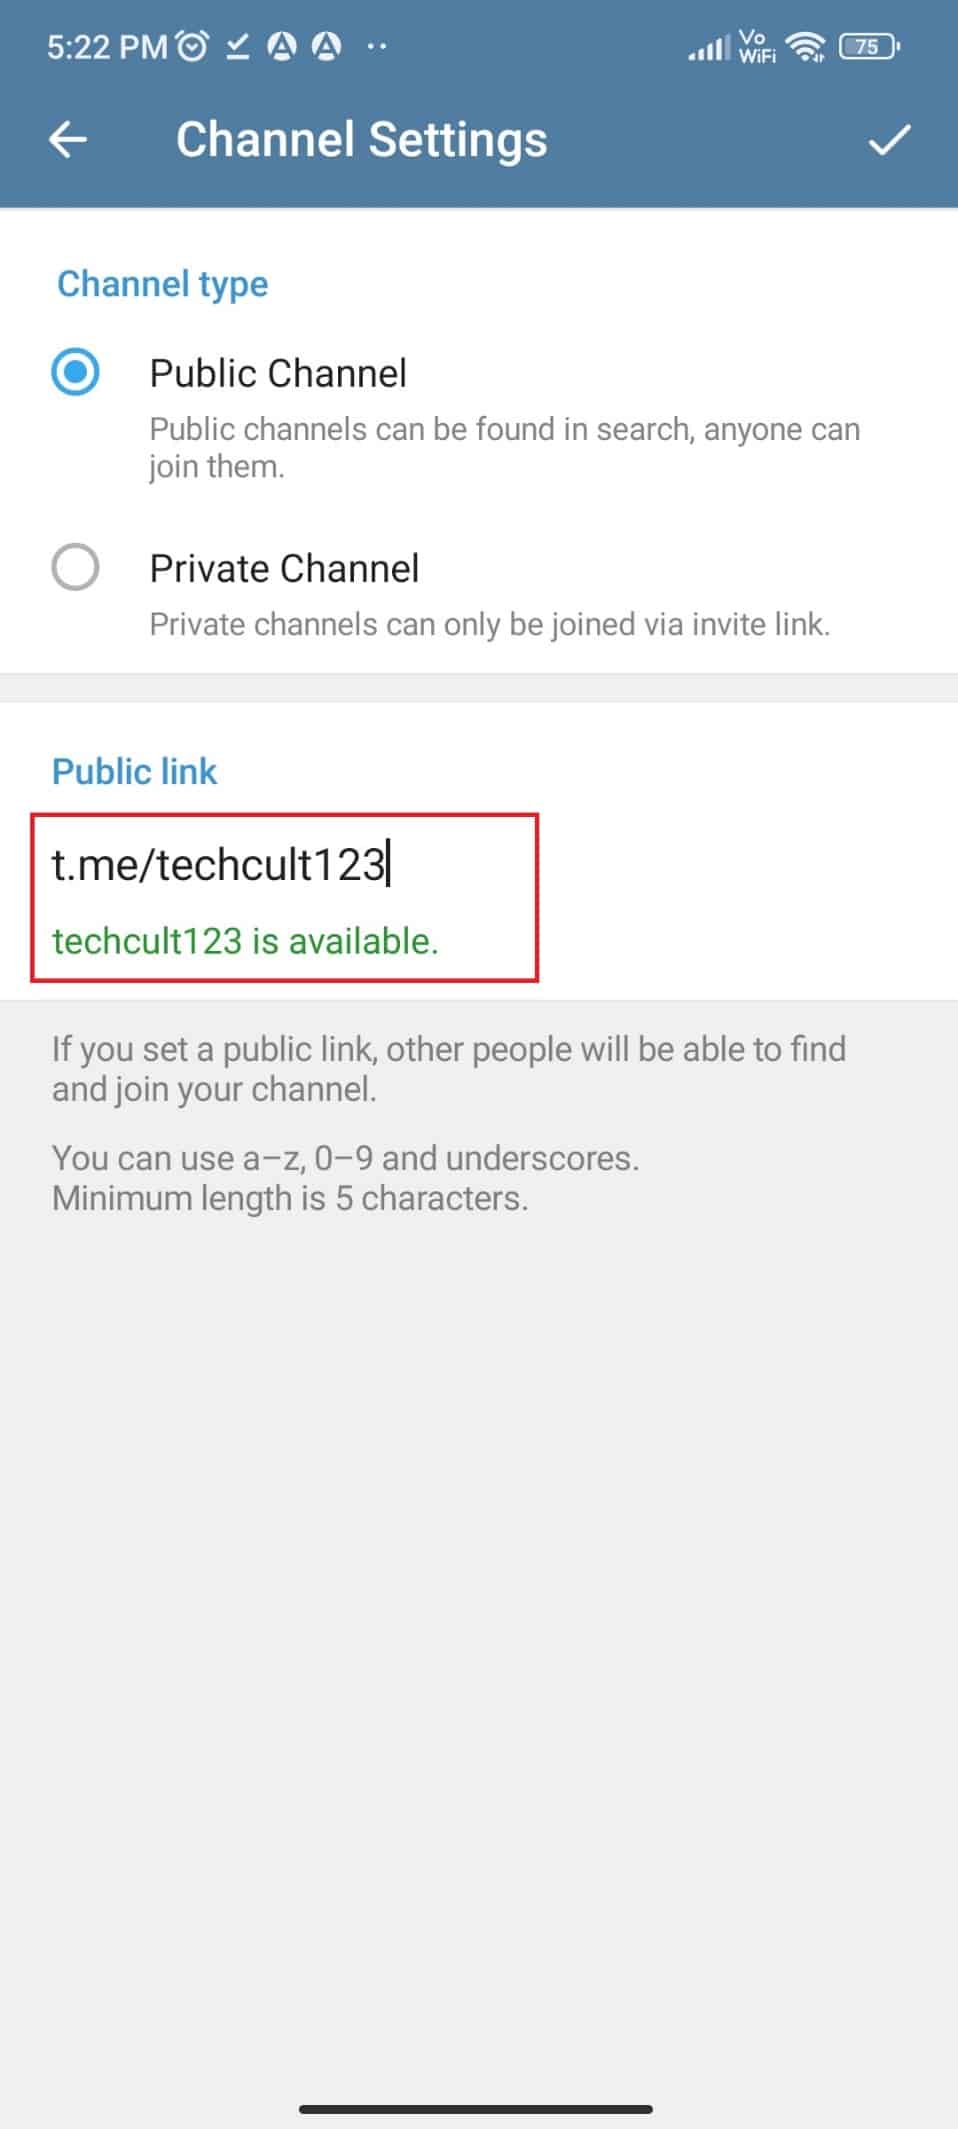 Enter characters that you want to use to create a link and select the available link